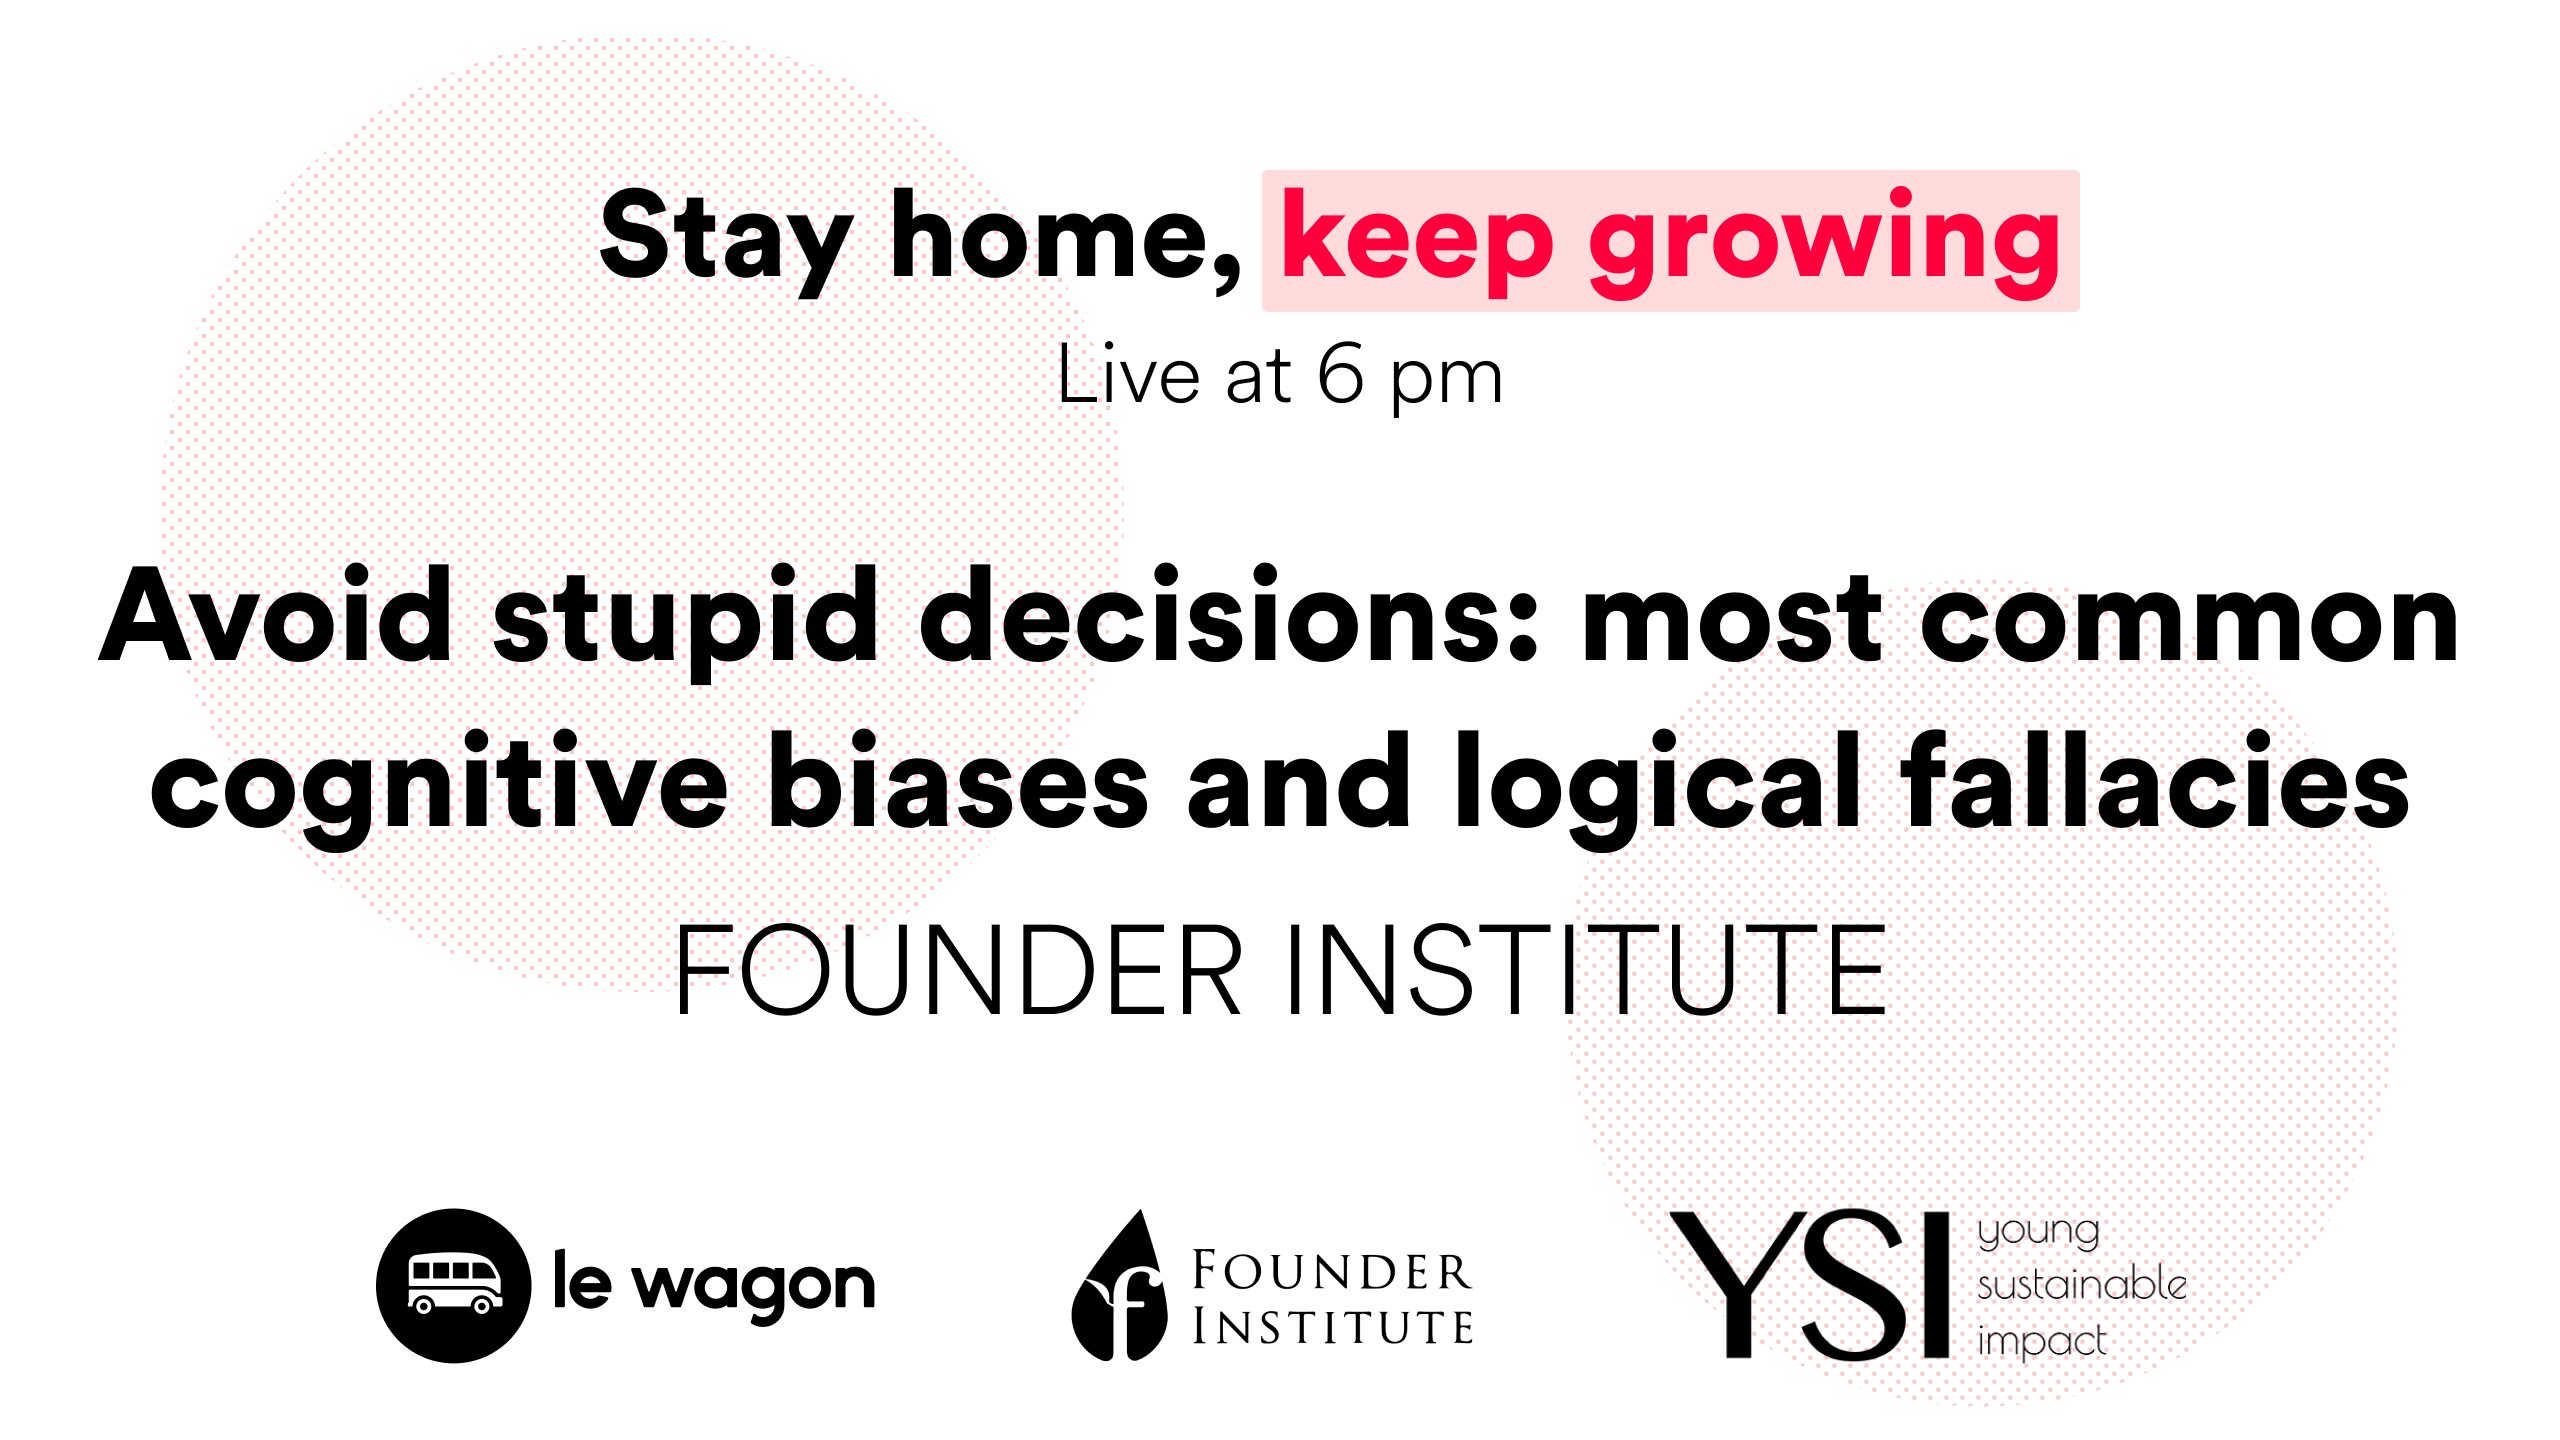 Avoid stupid decisions: most common cognitive biases and logical fallacies